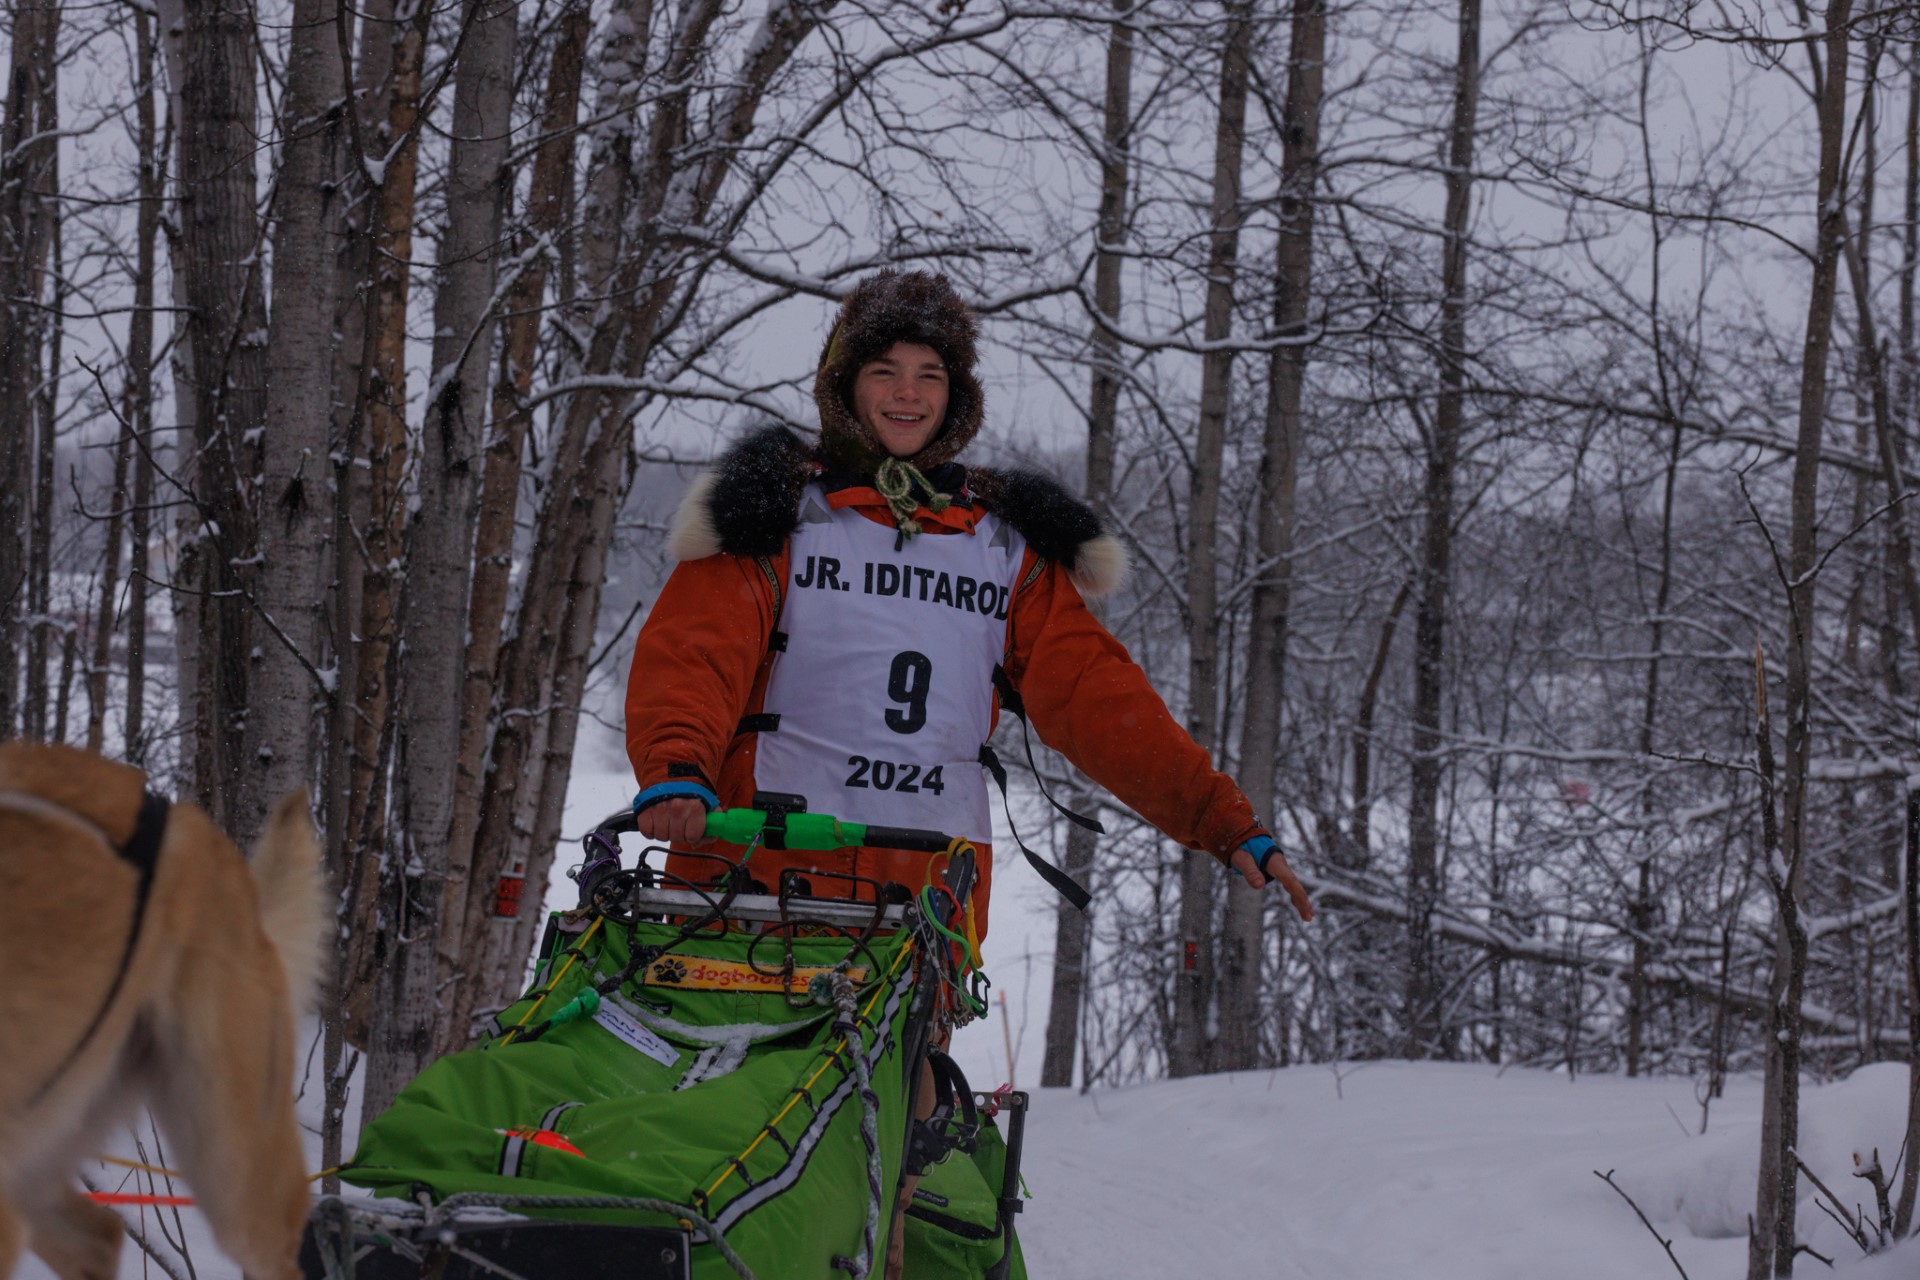 Wisconsin teen takes 2nd place in Junior Iditarod